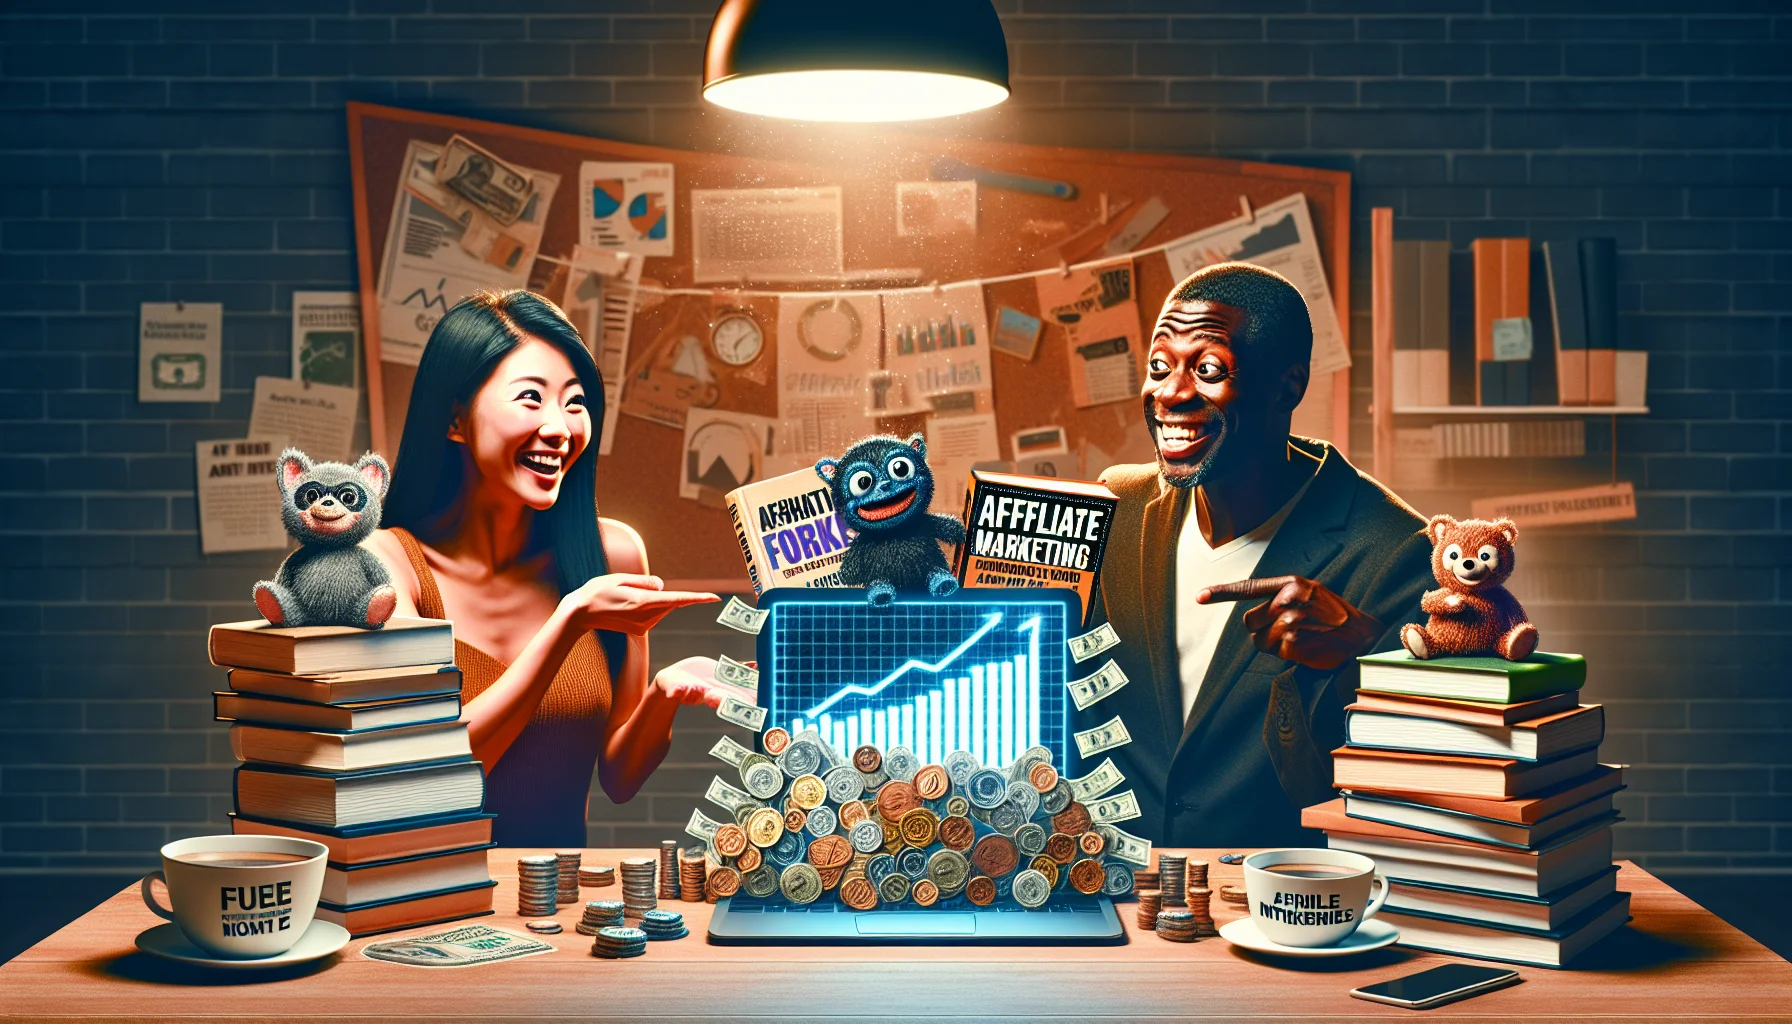 Craft an amusing, lifelike scene representing the top books on affiliate marketing in a compelling setting related to generating revenue on the internet. Visualize a range of books with engaging titles and colorful covers, strategically placed on a clean, modern desk lit by the warm glow of a desk lamp. Surround the books with elements often associated with online money-making – a sleek laptop displaying growth charts, coins and banknotes spilling out from the screen, a coffee cup labeled 'Fuel for Entrepreneurs', and a sign saying 'Affiliate Marketing = Passive Income'. A cheerful East Asian woman and a jovial Black man are engaging in a spirited discussion over these books, pointing and laughing at the over-the-top nature of their venture. Both are casually dressed, relaxed yet focused on their task.